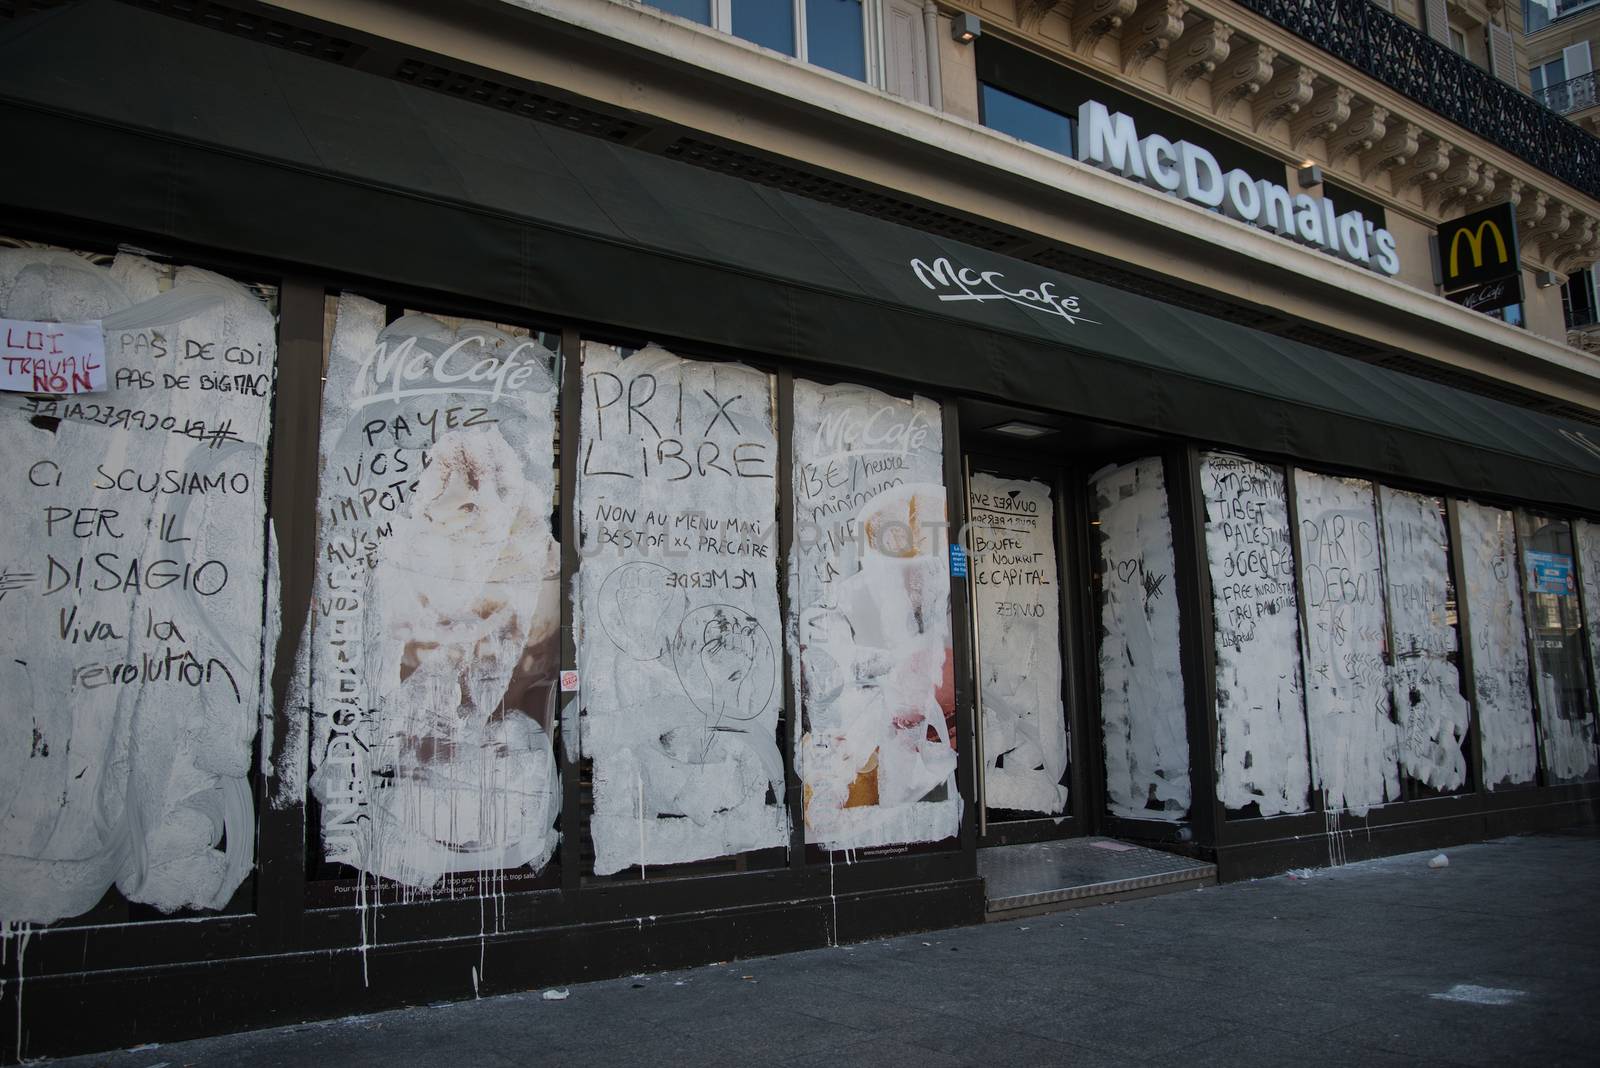 FRANCE, Paris : This picture shows a damaged Mcdonald's restaurant near gare du Nord, in Paris, on April 20, 2016 after a protest against split shifts and to demand wage increases in front of fast food restaurants.